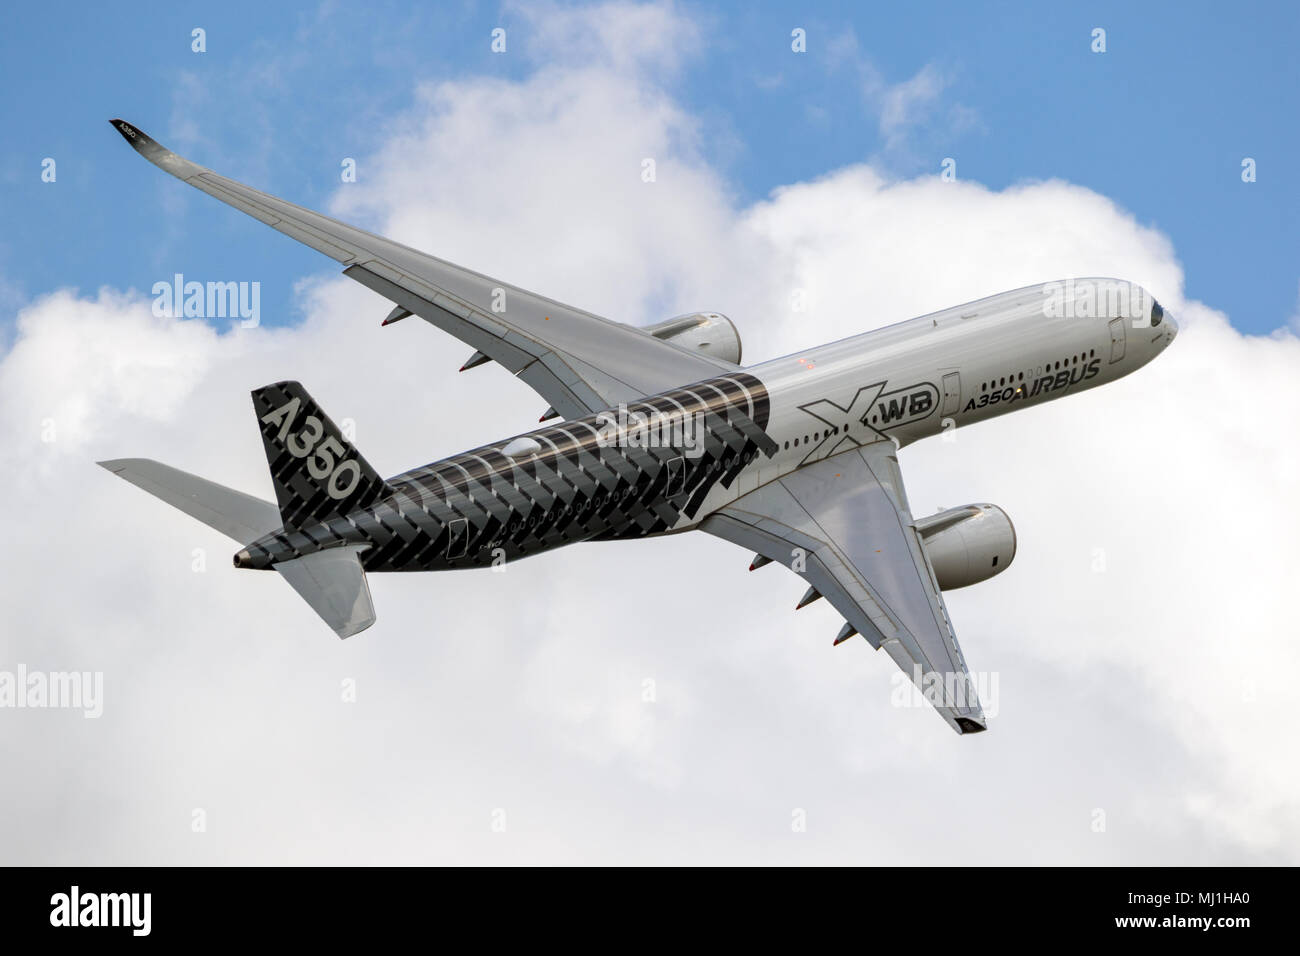 BERLIN - APR 27, 2018: New Airbus A350 XWB passenger plane performing at the Berlin ILA Air Show. Stock Photo